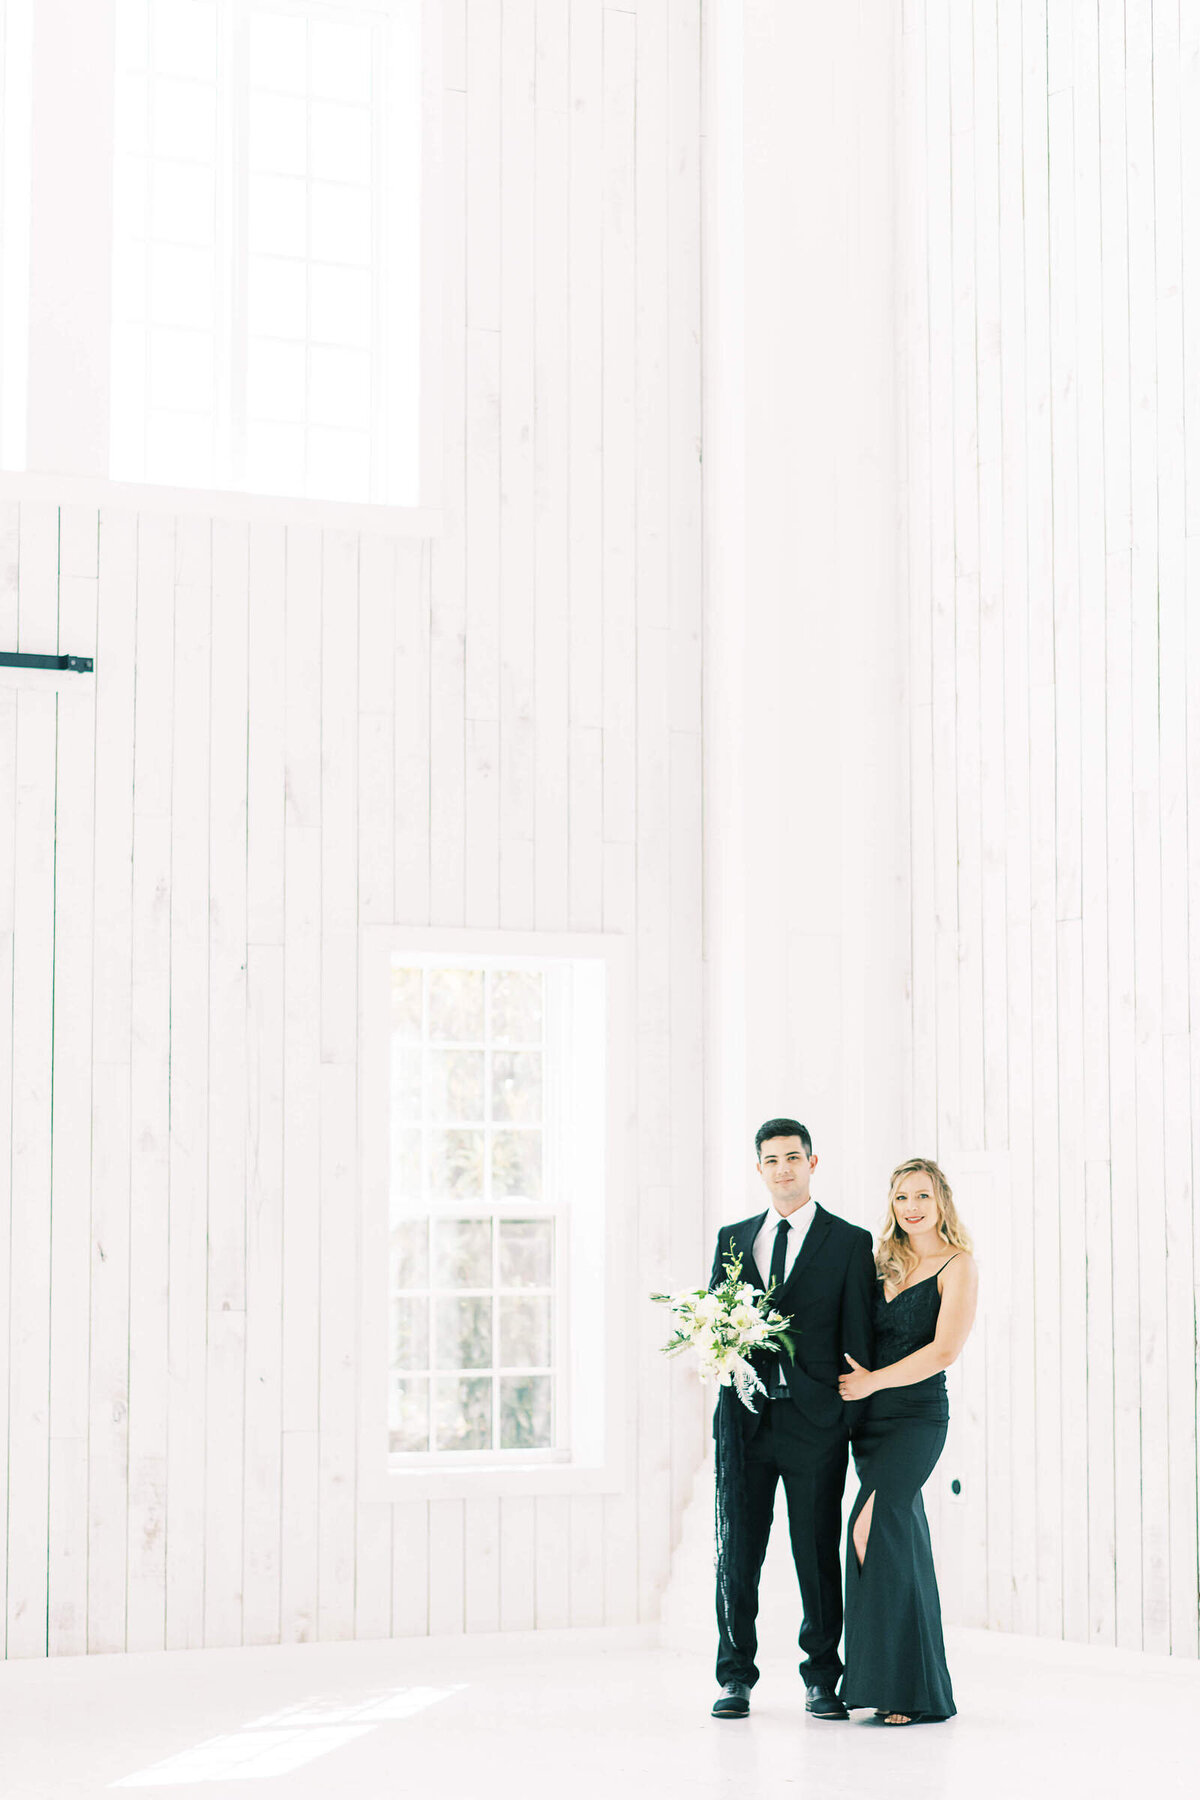 07 The White Sparrow Barn North Texas Engagement Kate Panza Photography Laura Lee and Justus